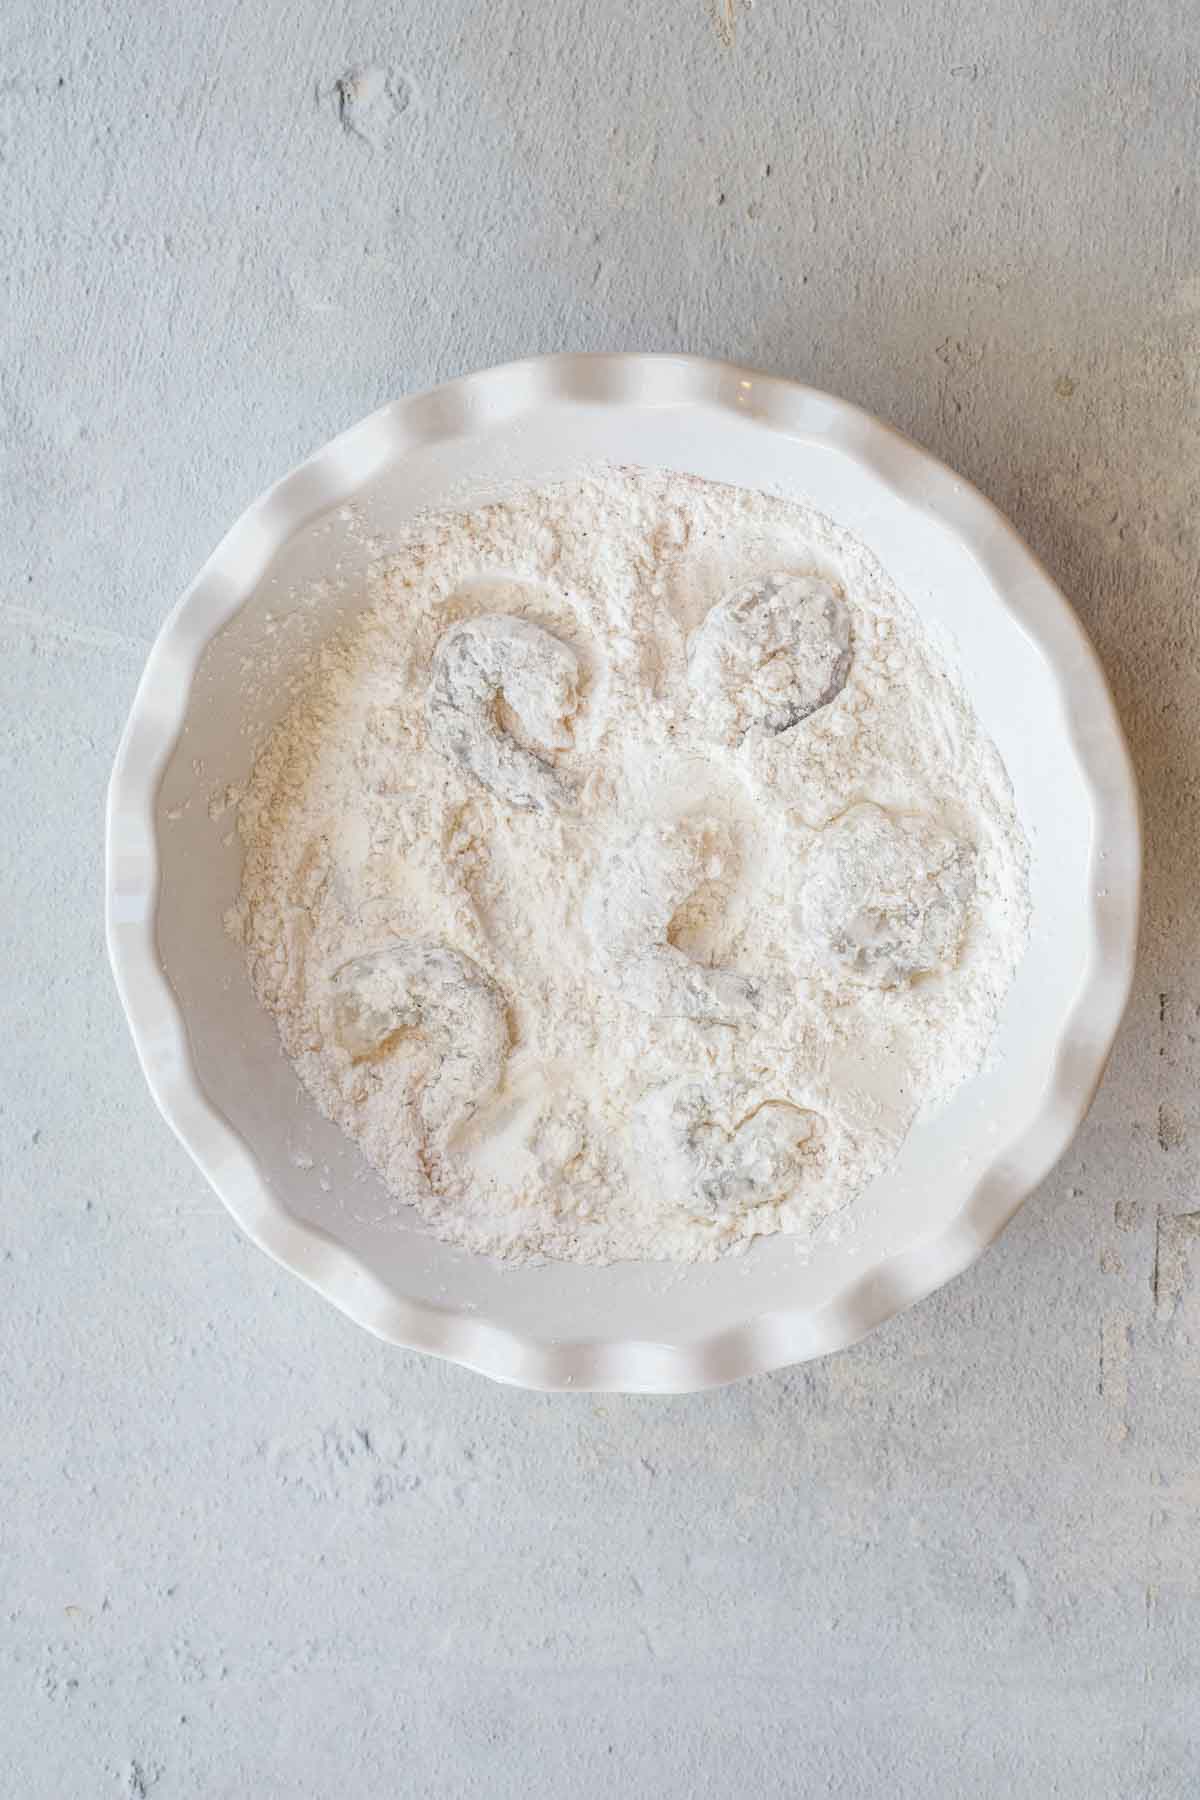 A white bowl with the shrimp in the flour mixture.